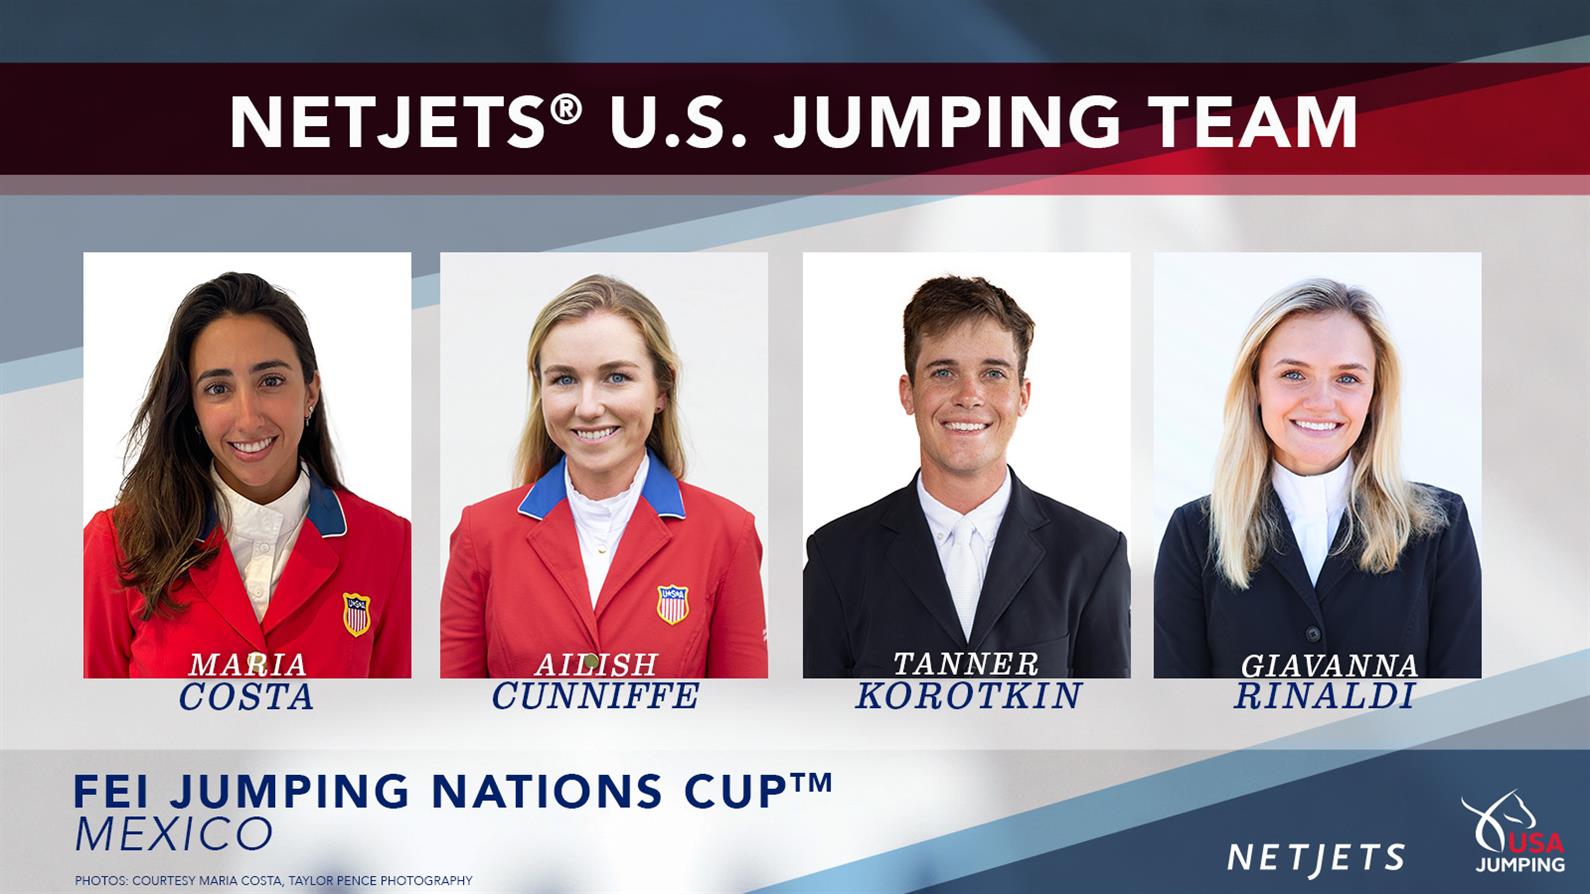 Team roster for FEI Jumping Nations Cup - Mexico